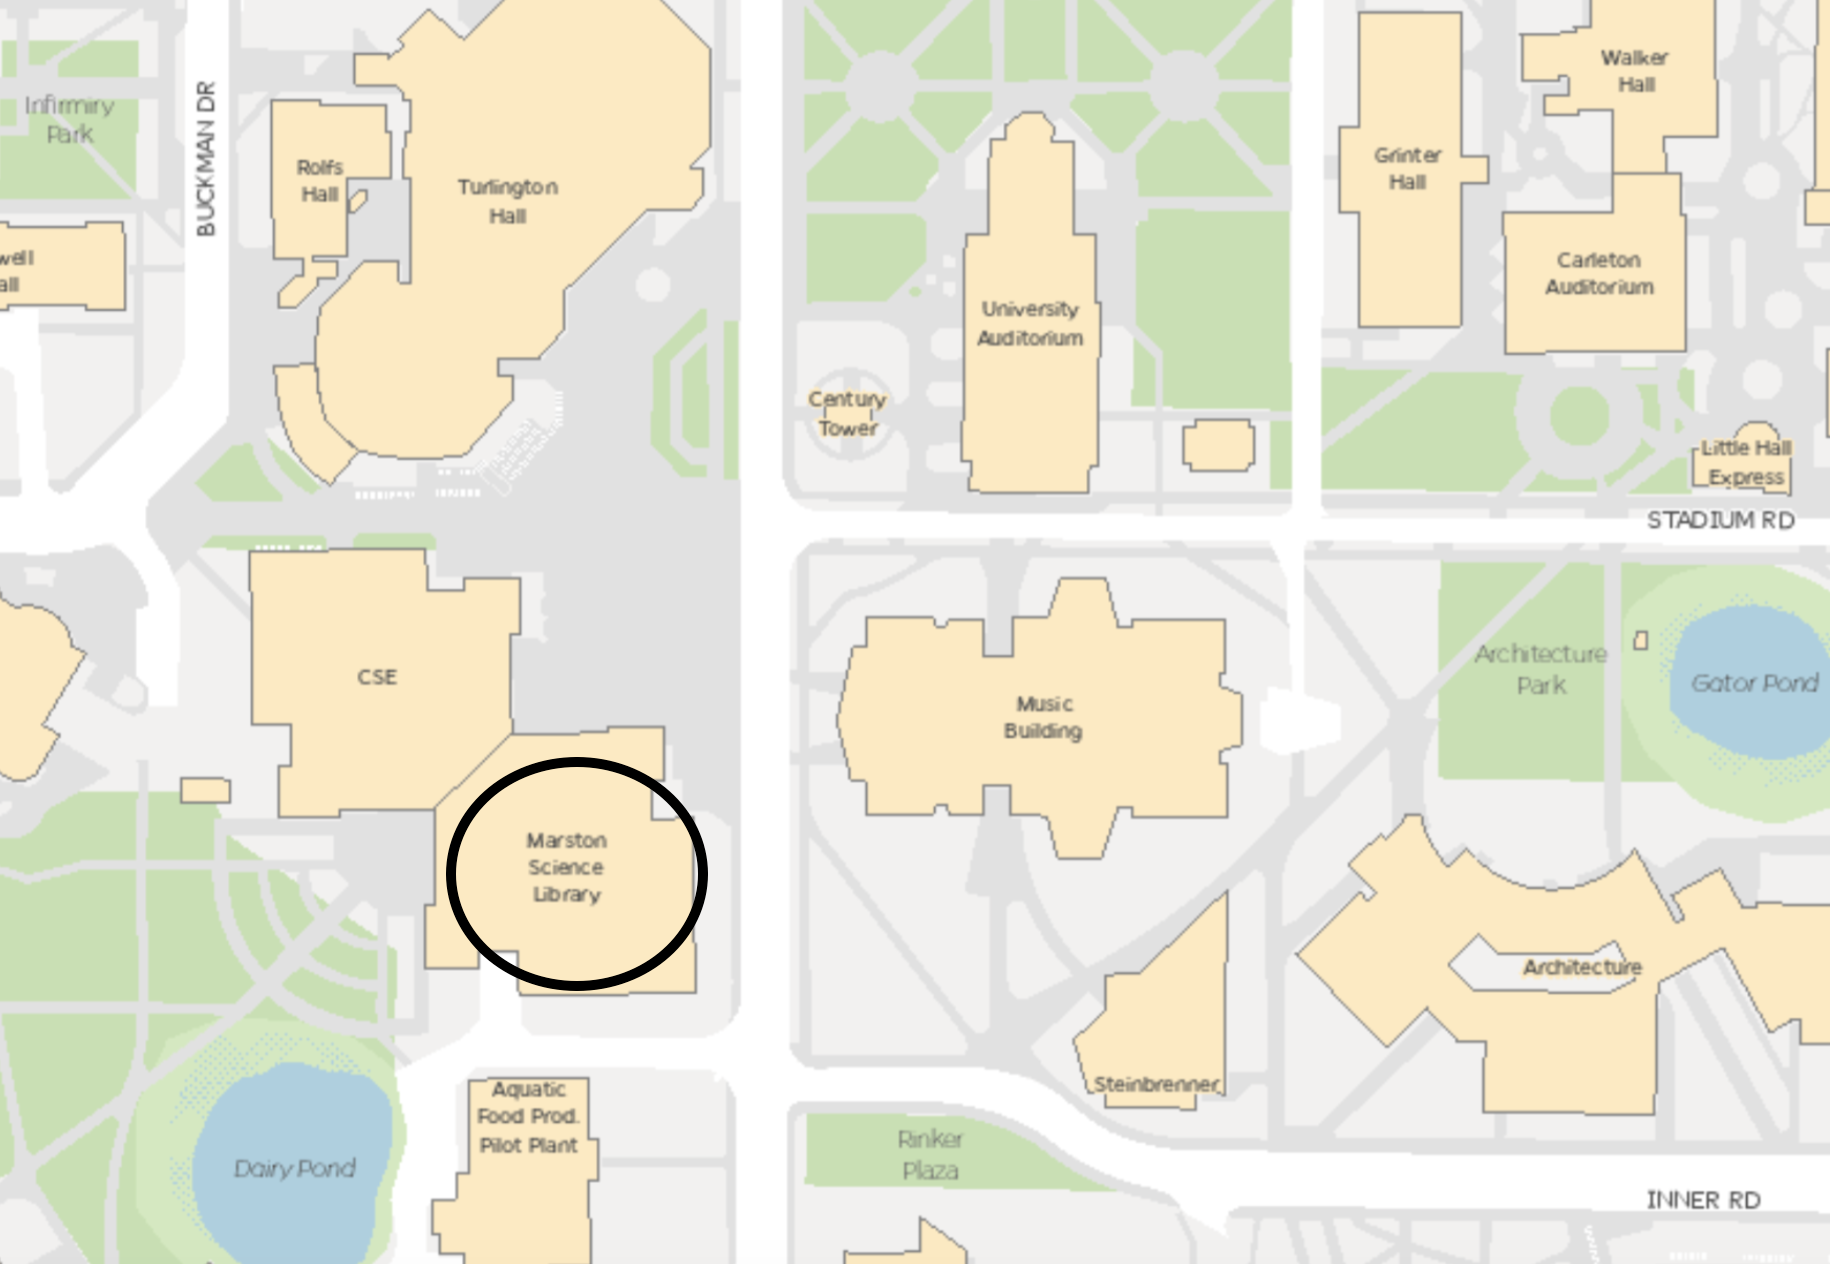 Map of UF Campus, with Marston Science Library Circled